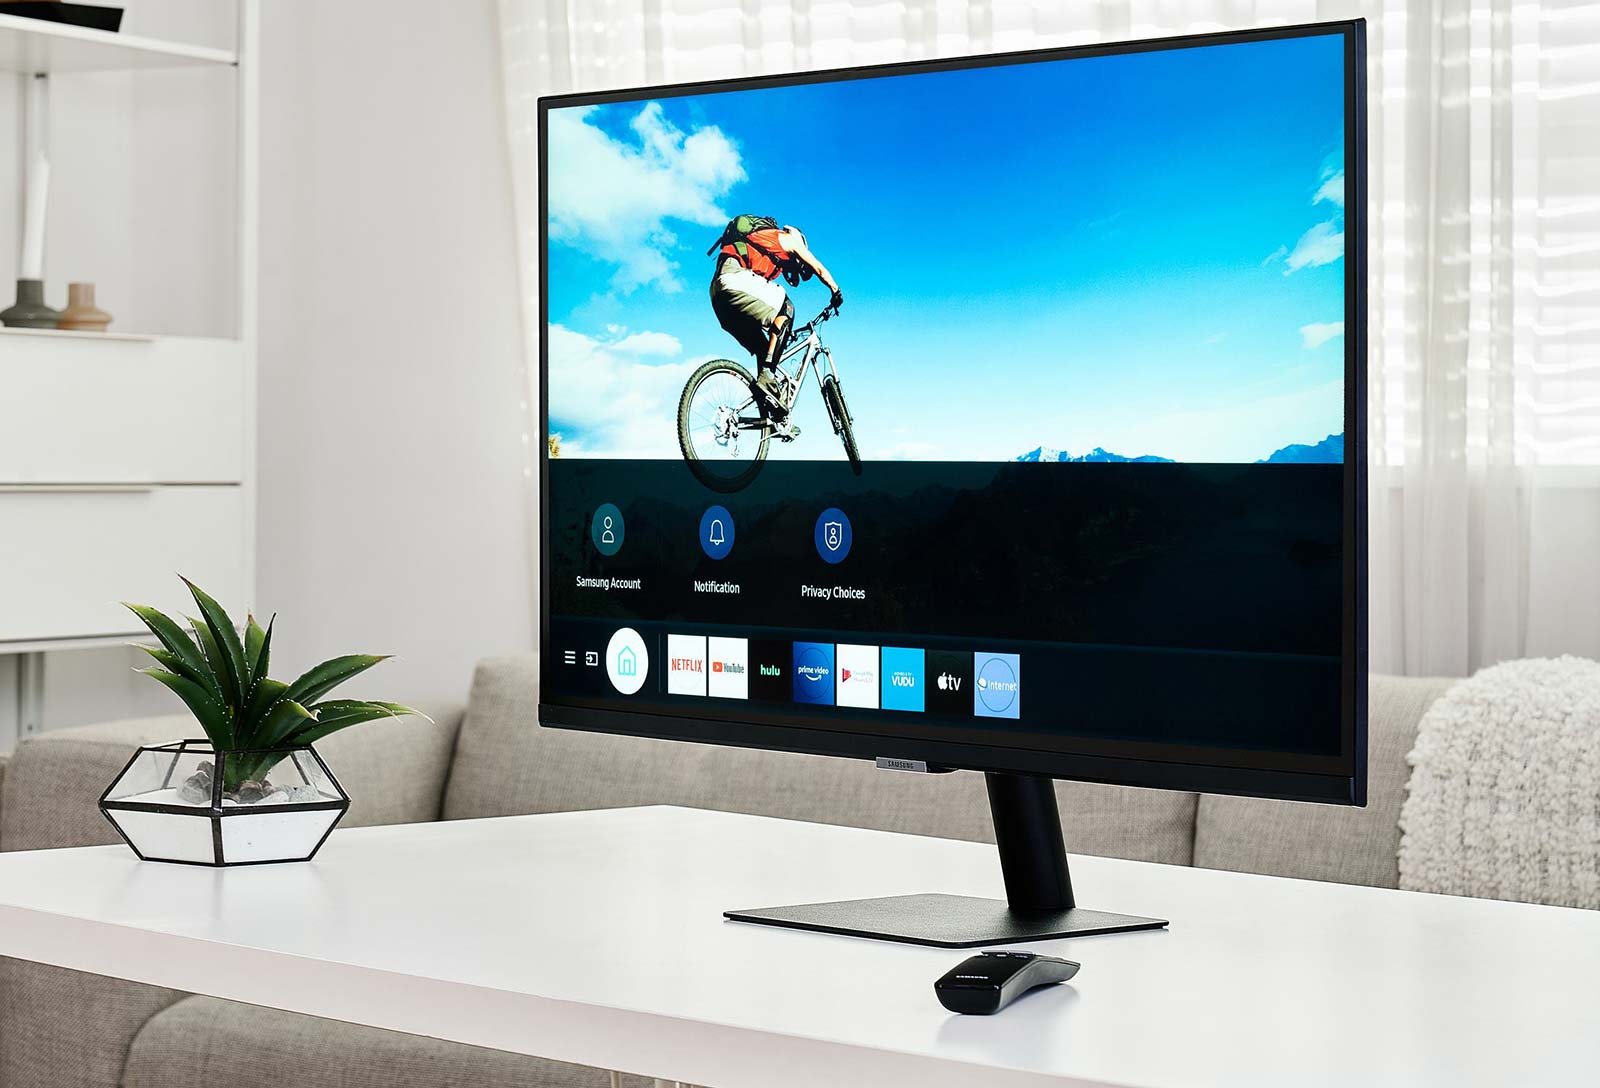 Samsung Unboxes Its 2021 Lineup - MICRO LED, Neo QLED, Lifestyle TV, Monitors, And More